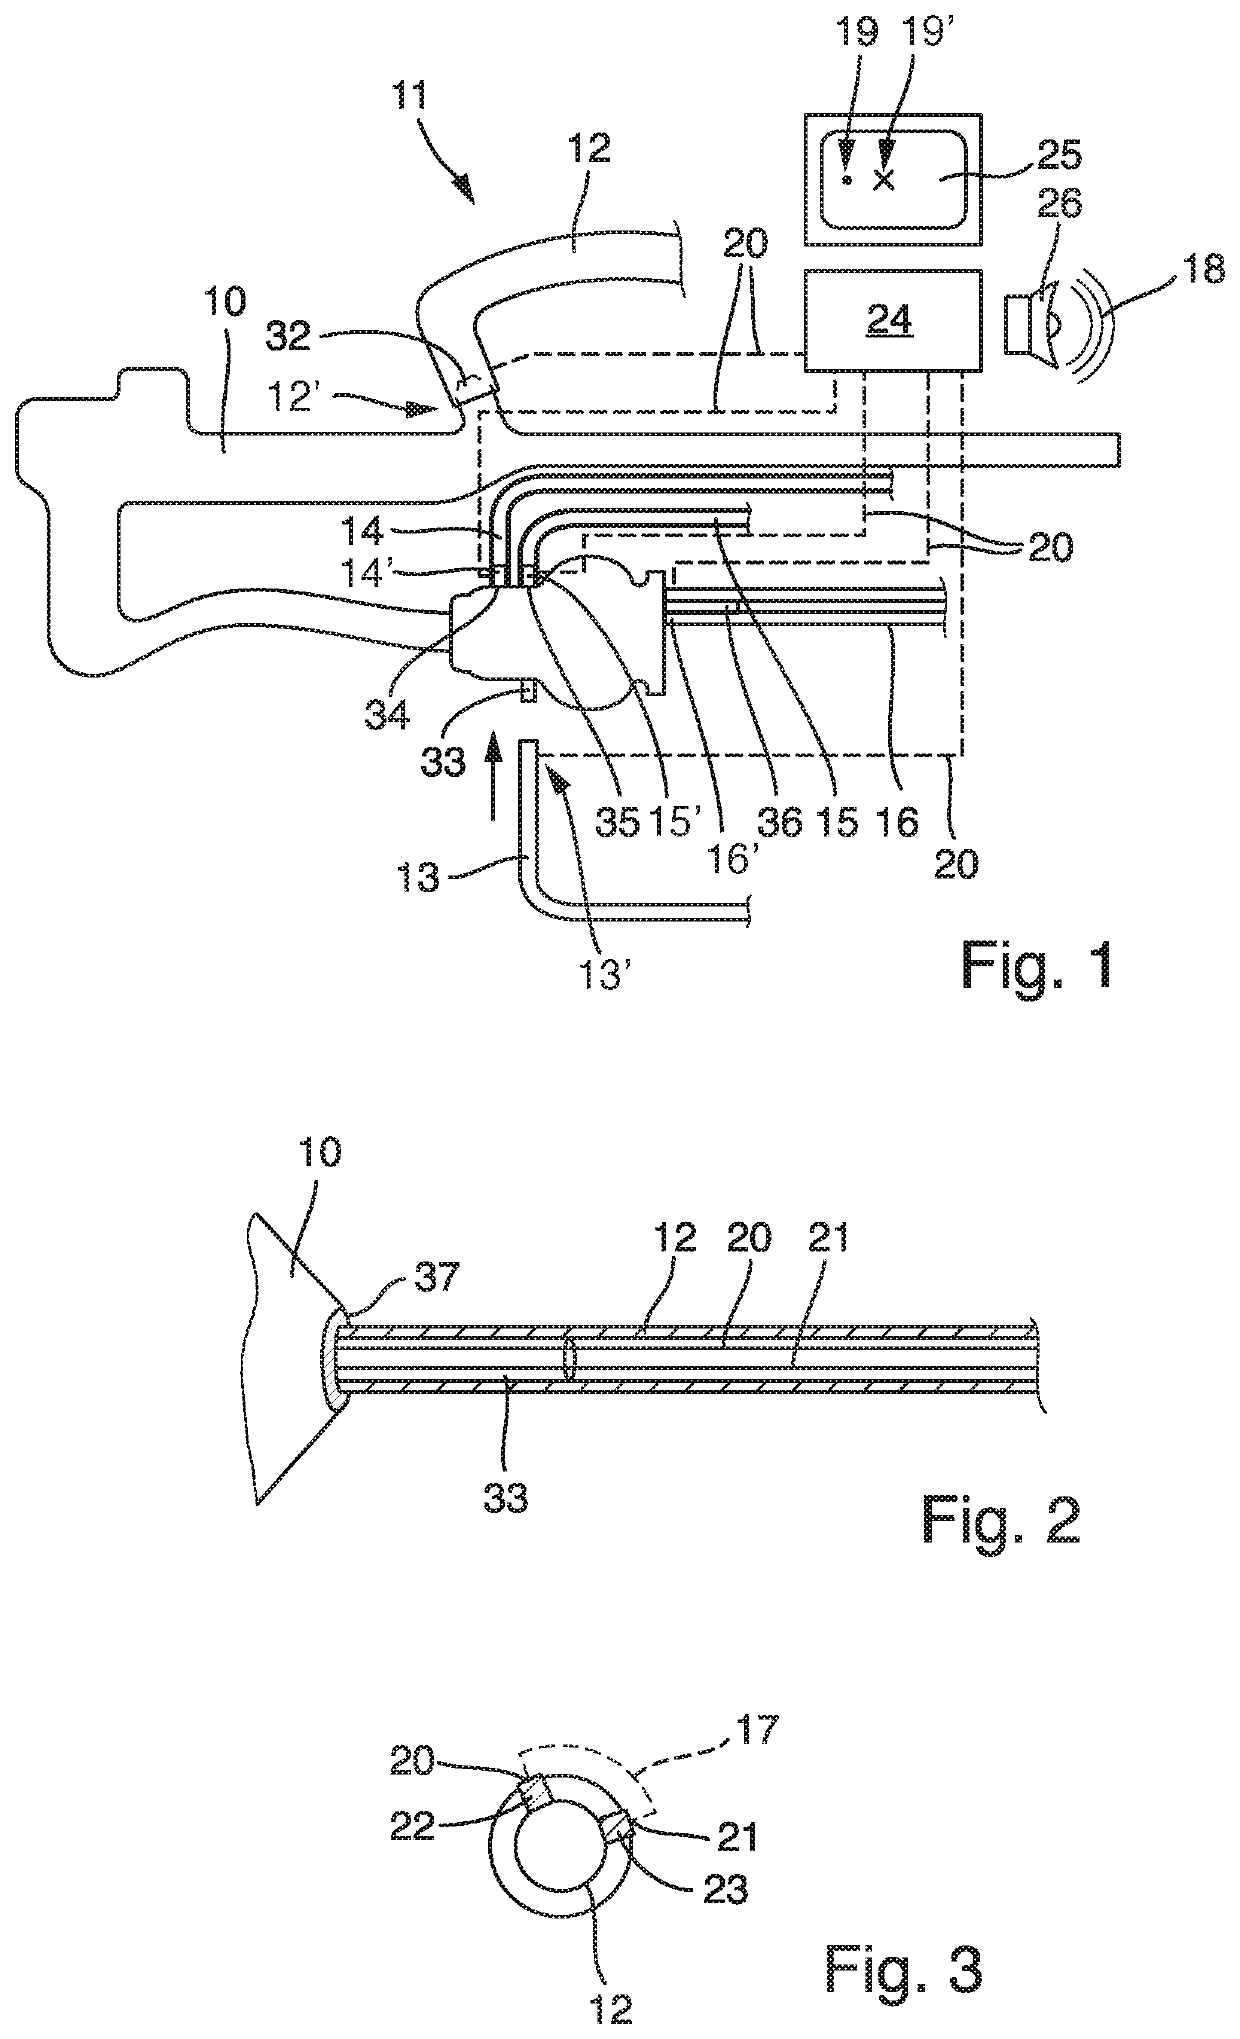 Monitoring of the connection of fluid lines to surgical instruments